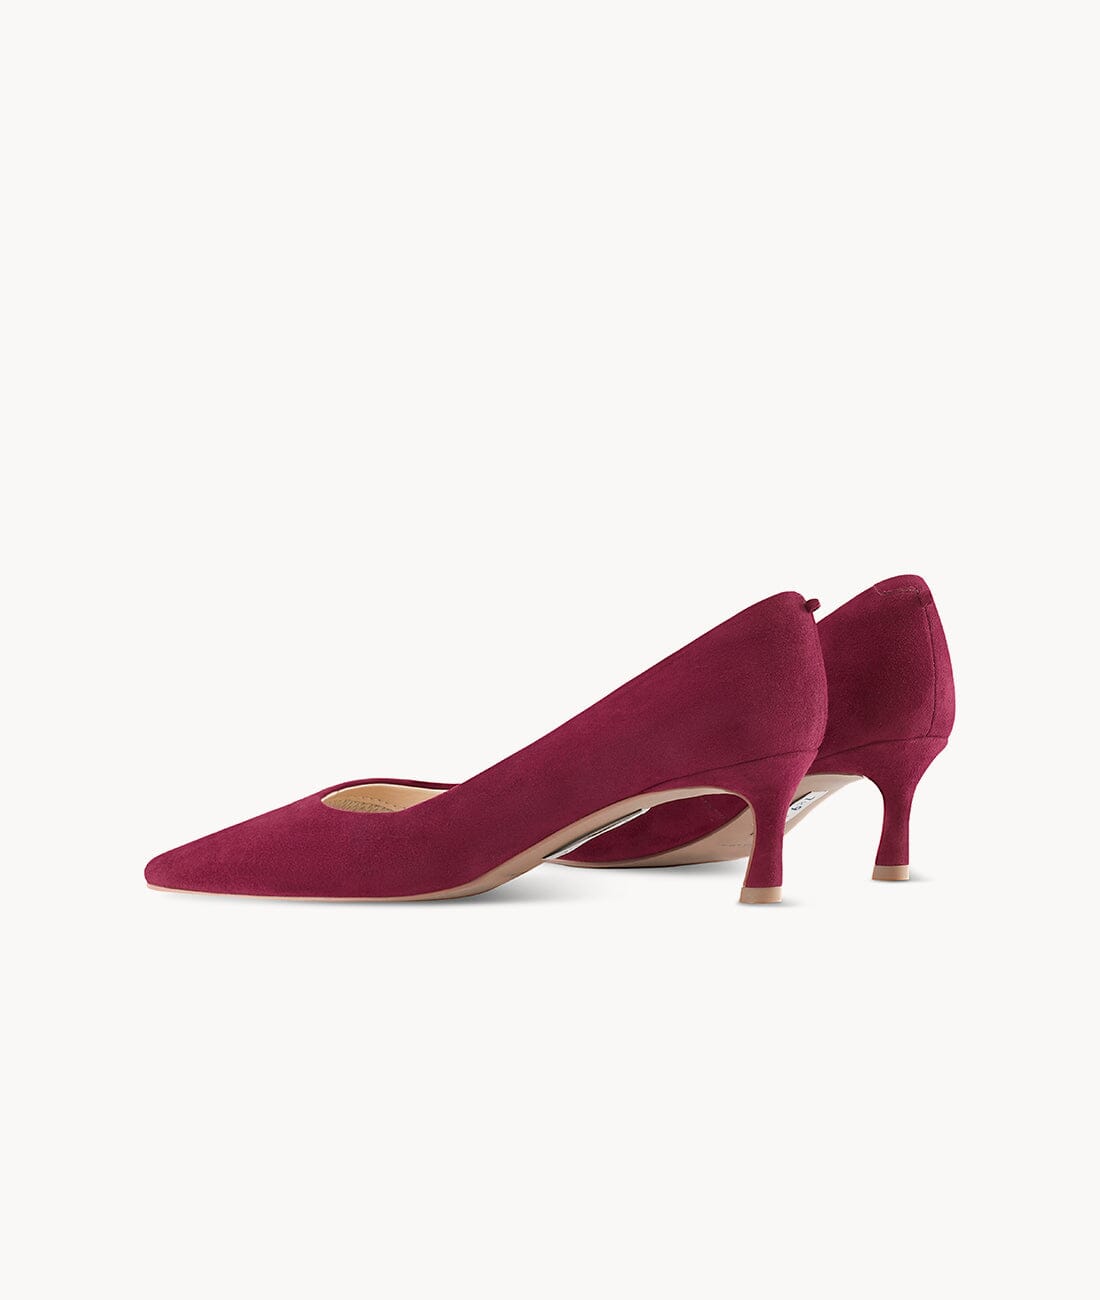 7or9 - Bayberry (Wide Last) - Pumps